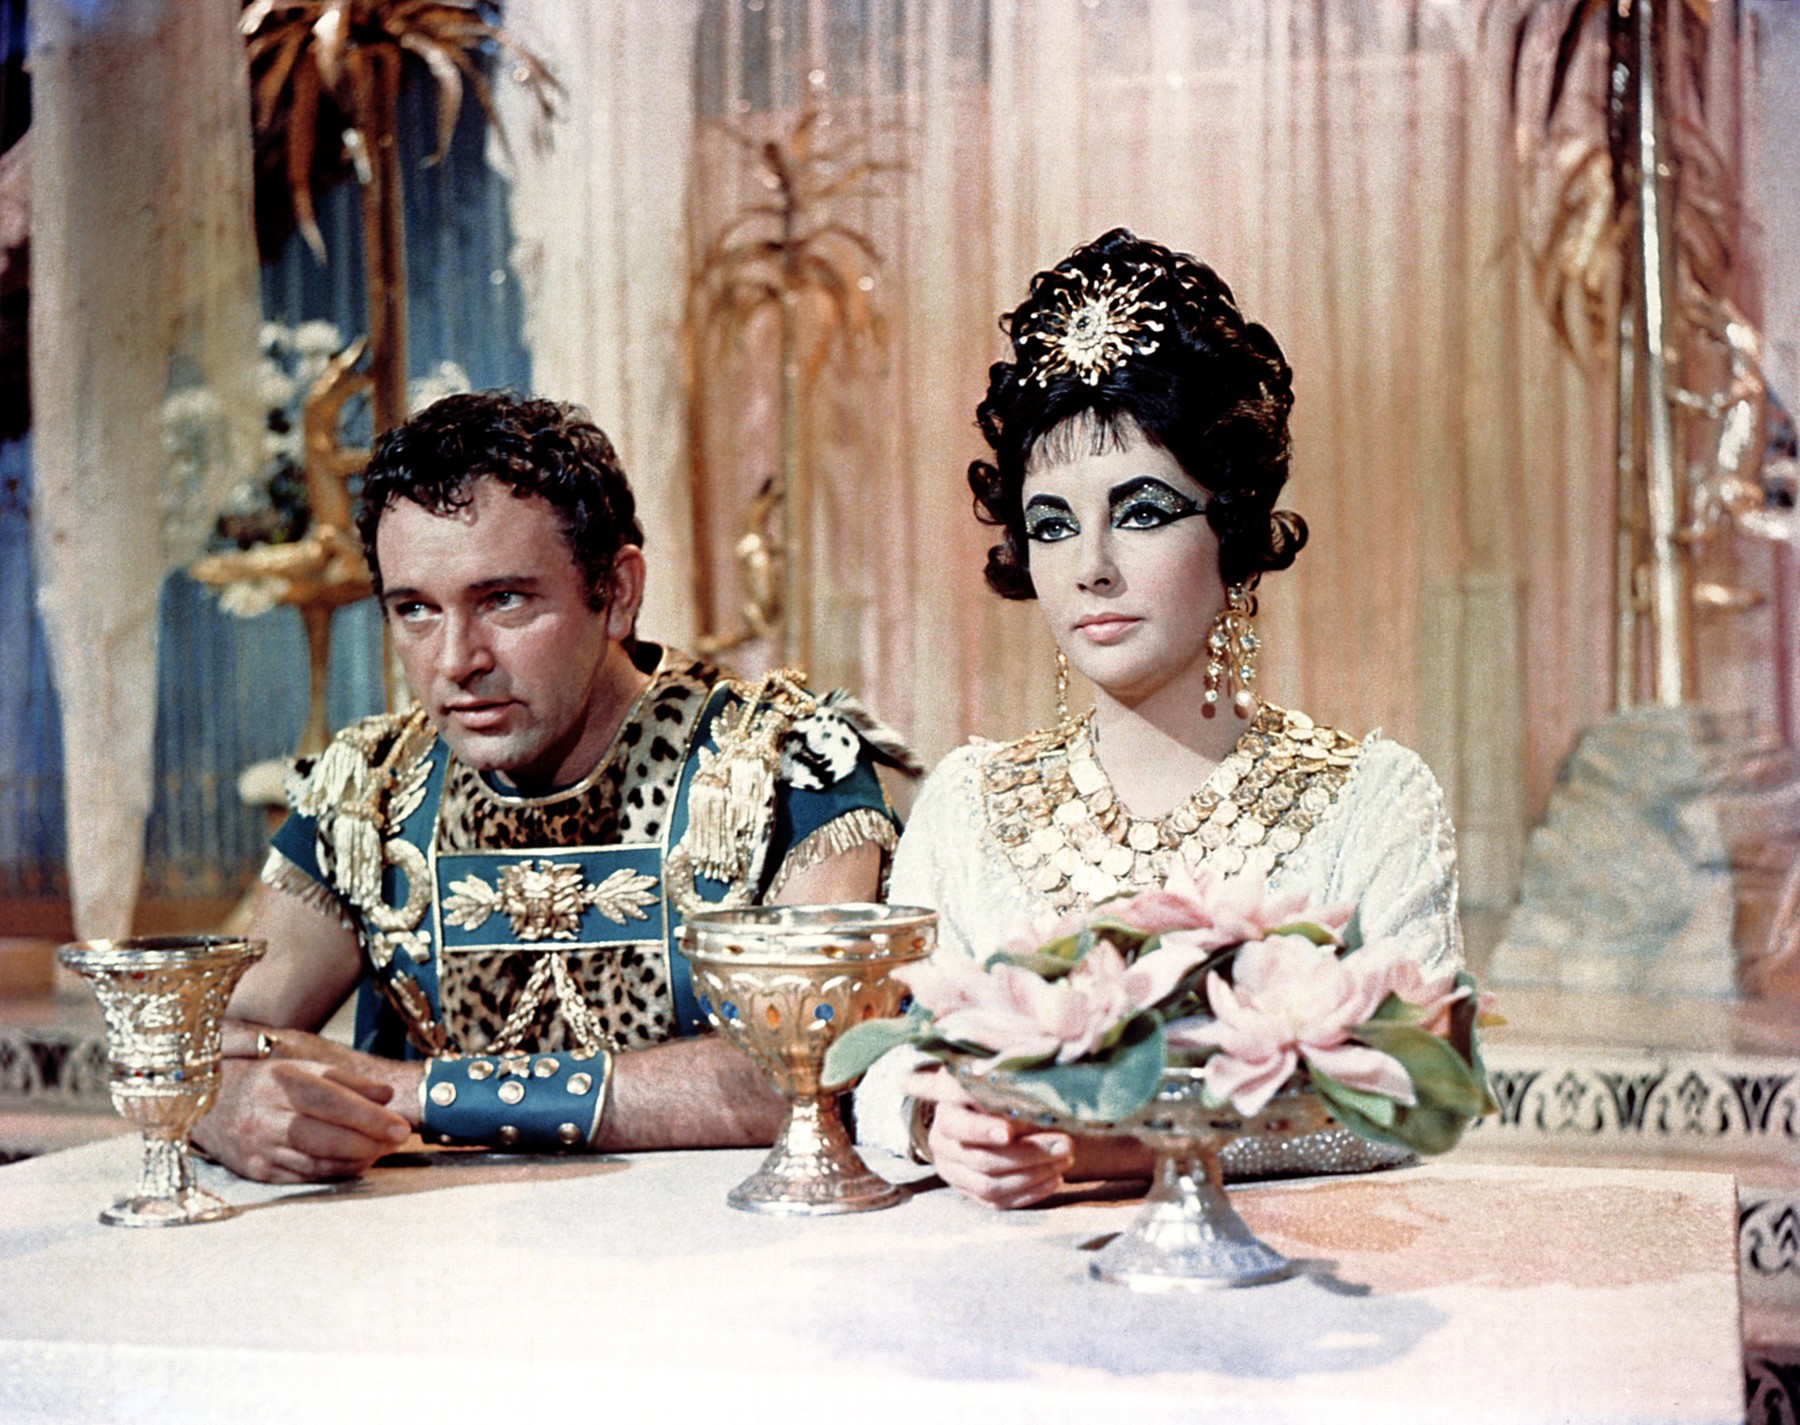 CLEOPATRA,  Richard Burton and Elizabeth Taylor, 1963., Image: 97837721, License: Rights-managed, Restrictions: For usage credit please use; ©20thCentFox/Courtesy Everett Collection, Model Release: no, Credit line: 20thCentFox Collection / Everett / Profimedia